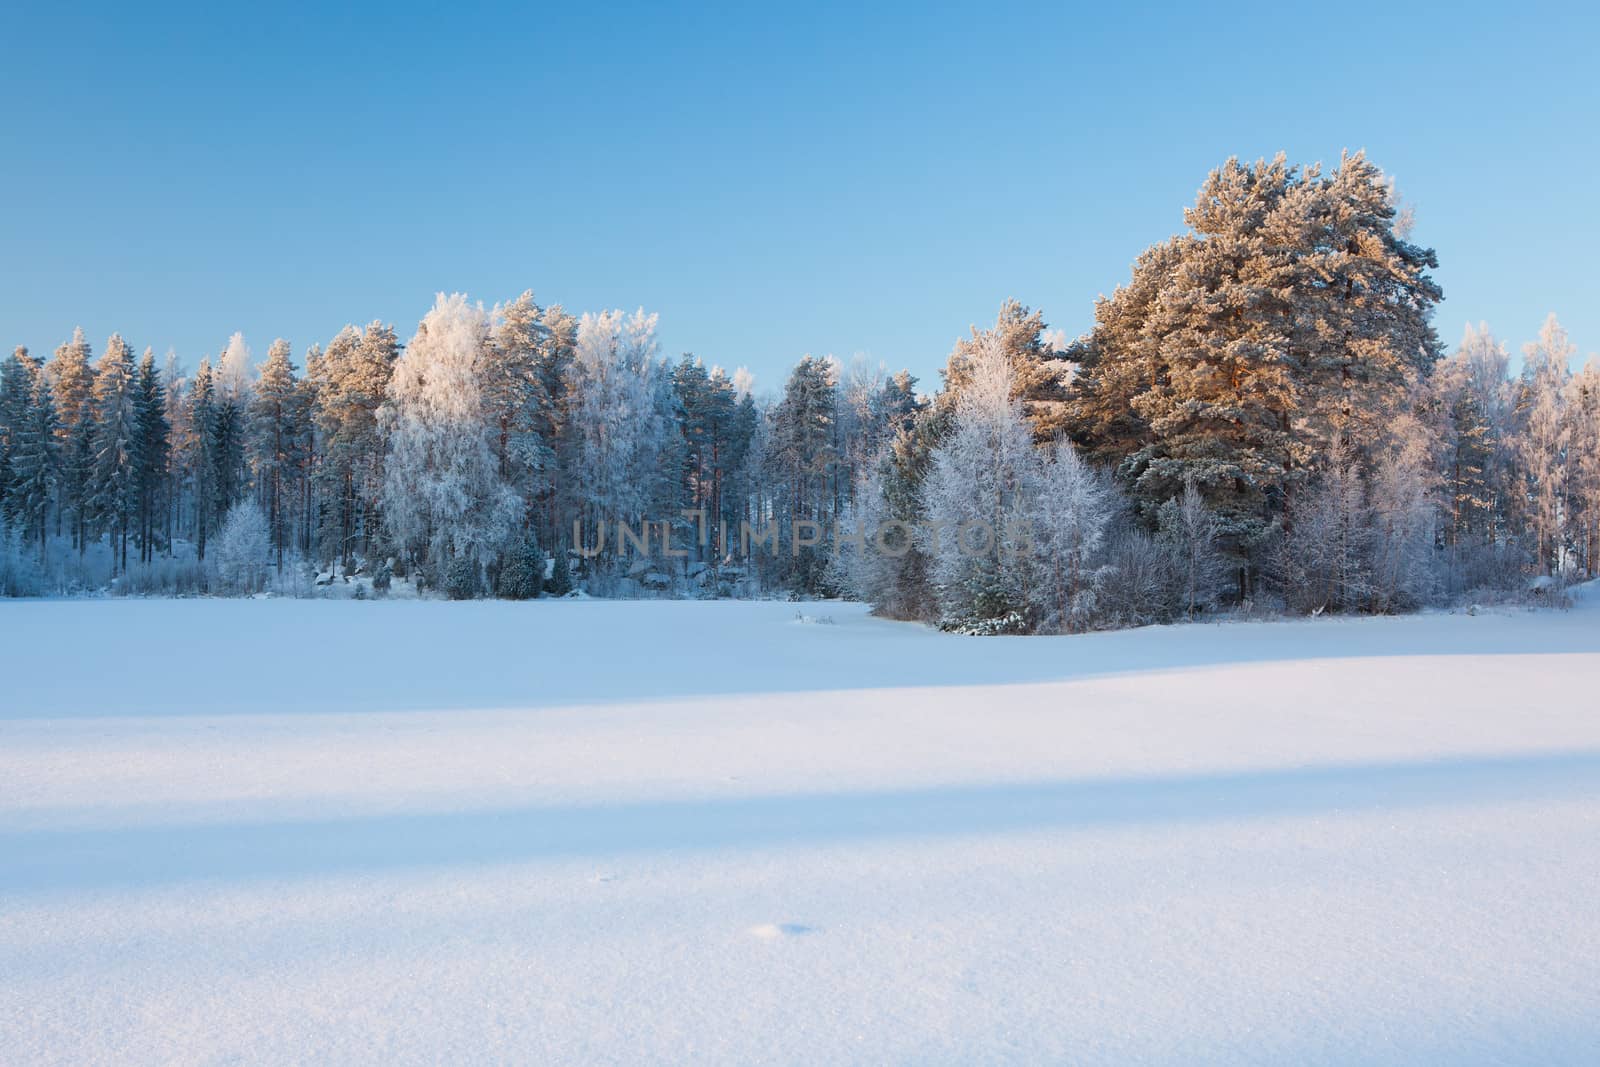 Snow winter landscape of field and forest